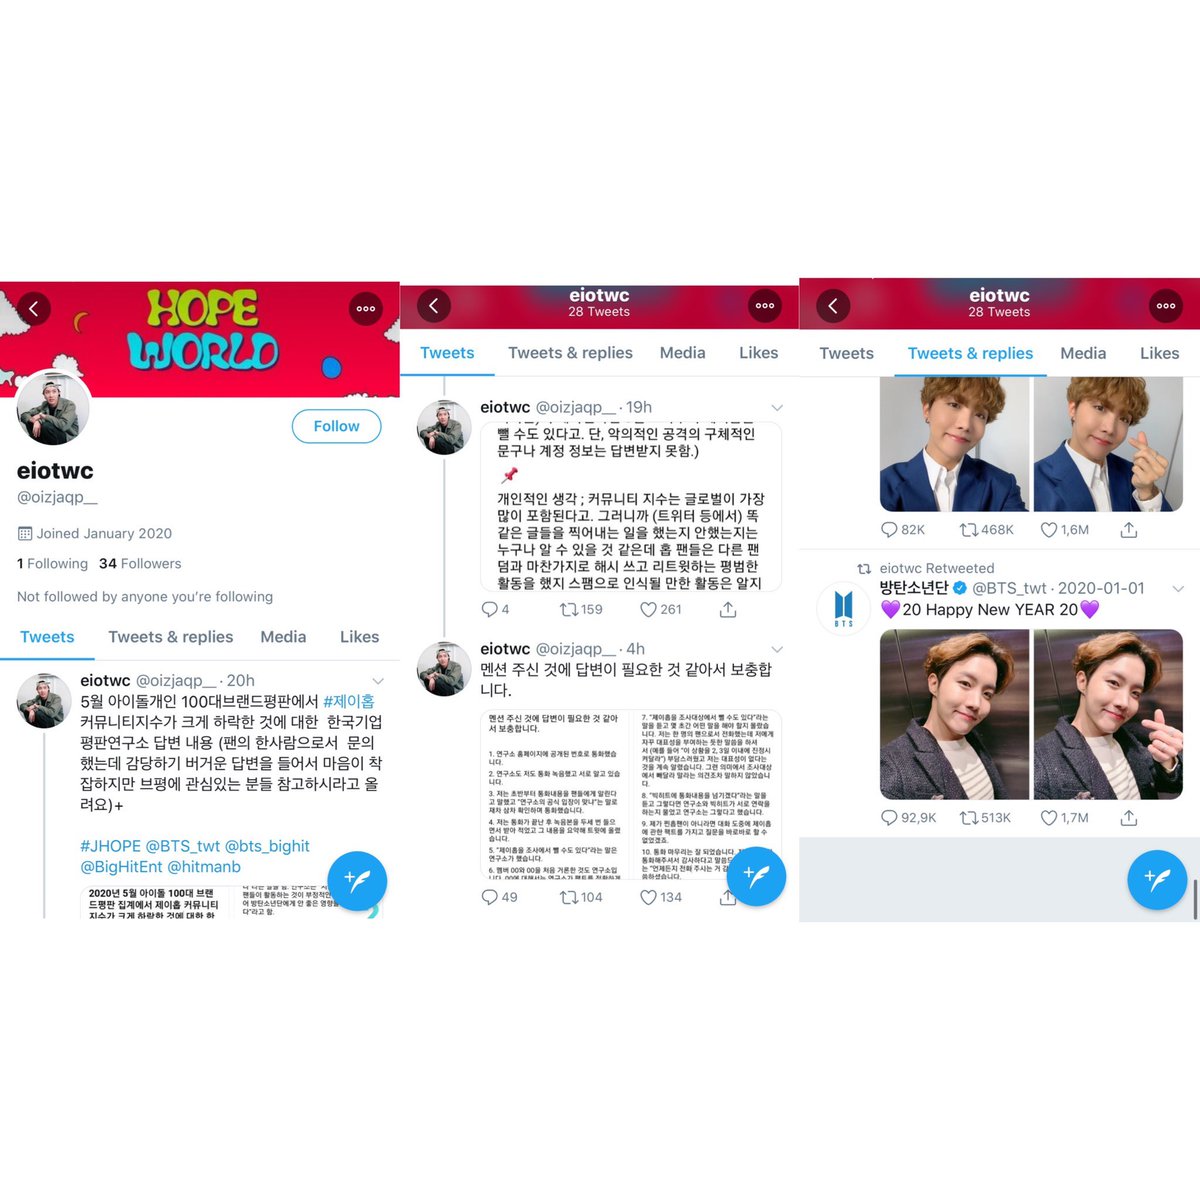 Bora retweeted this tweet claiming that BR is unreliable. The information first came from an inactive account and was translated by a J/M anti who had purposefully left out information.